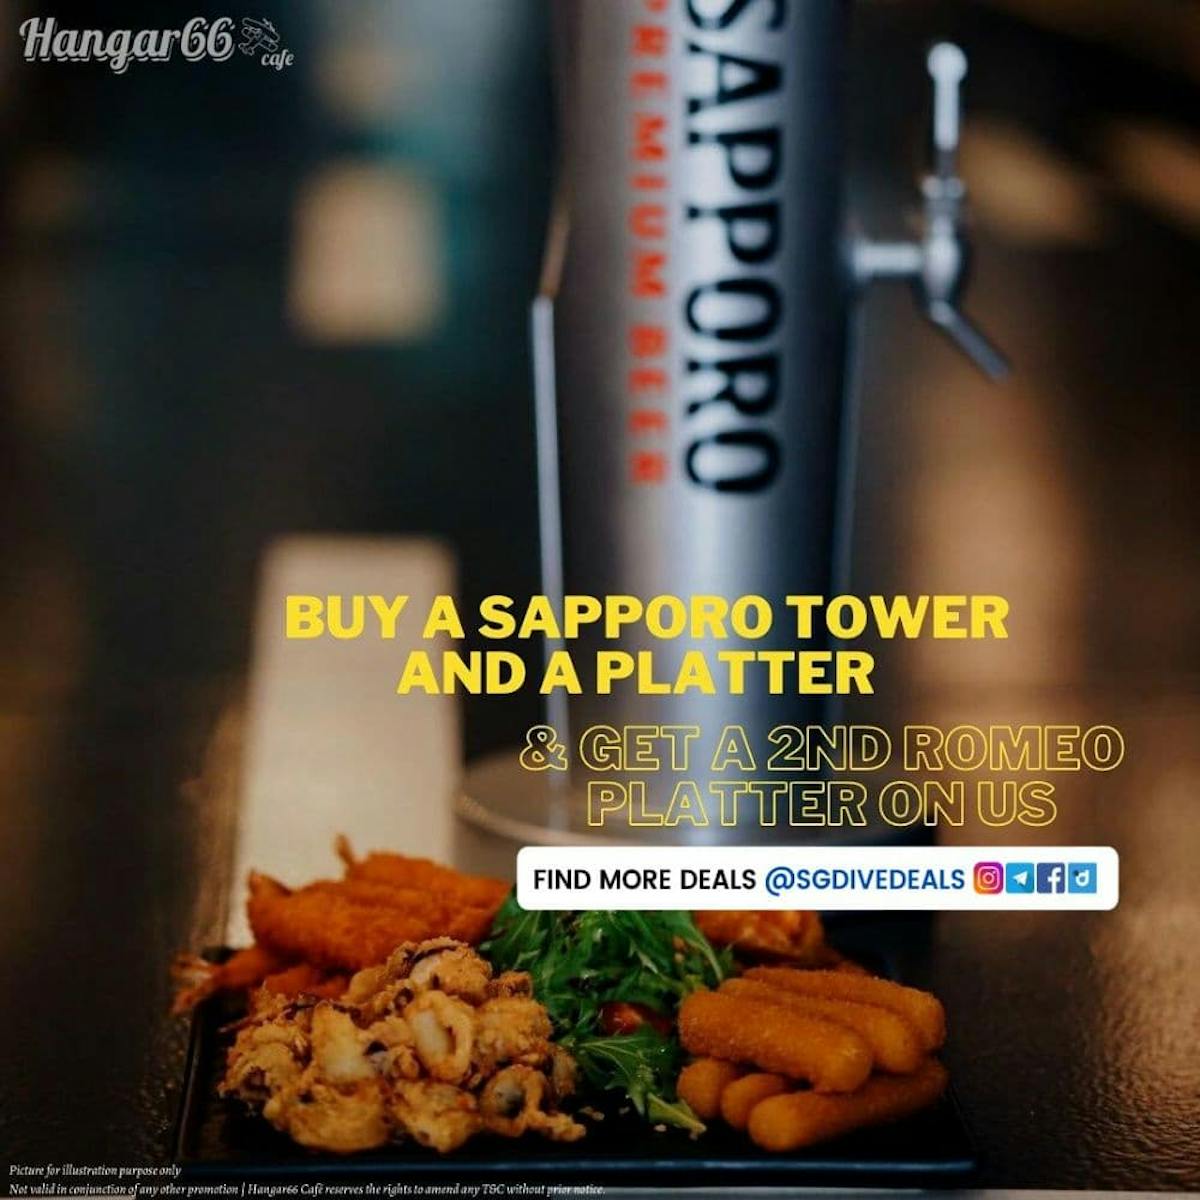 1-for-1 sharing platters with beer tower 